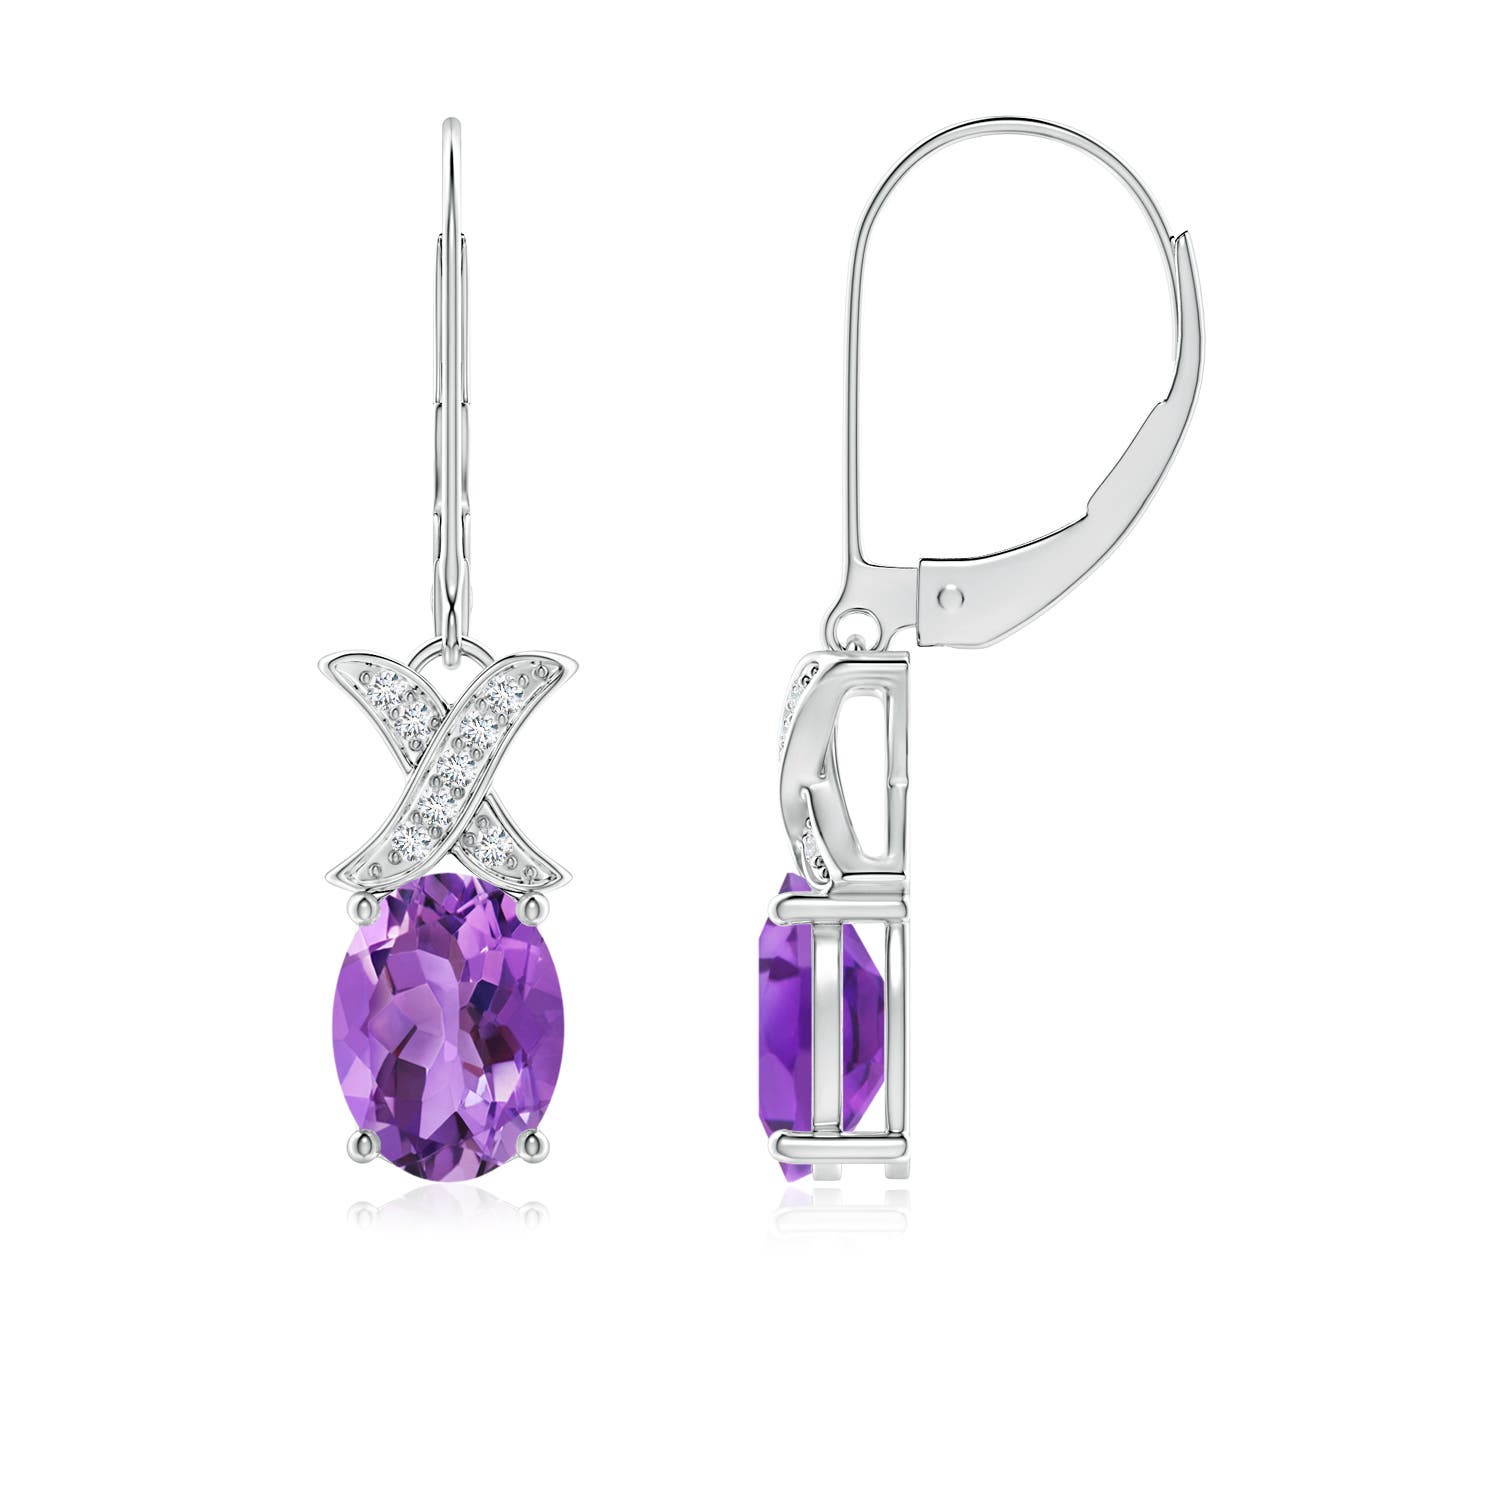 AA - Amethyst / 2.38 CT / 14 KT White Gold